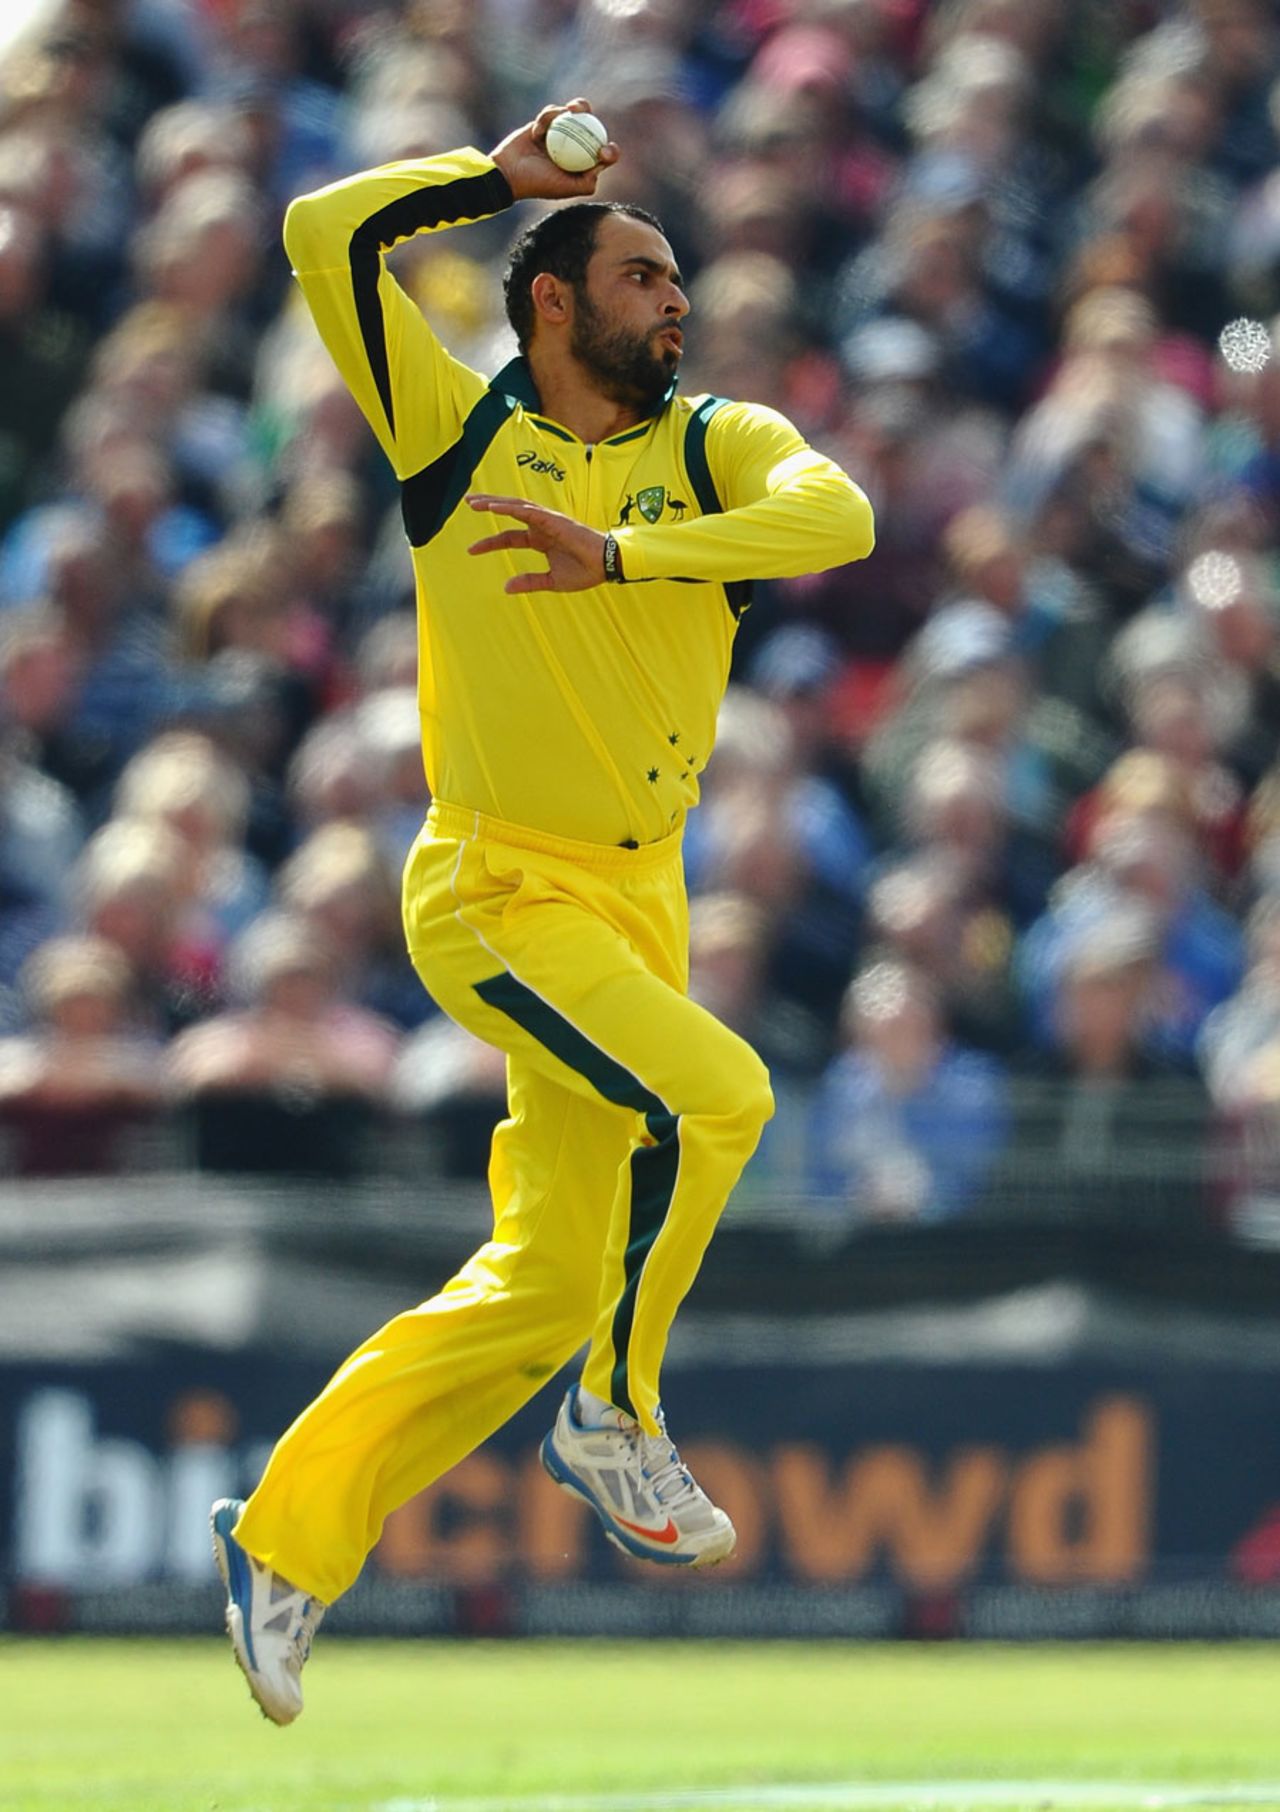 Fawad Ahmed did not have a fruitful day, England v Australia, 2nd NatWest ODI, Old Trafford, September 8, 2013